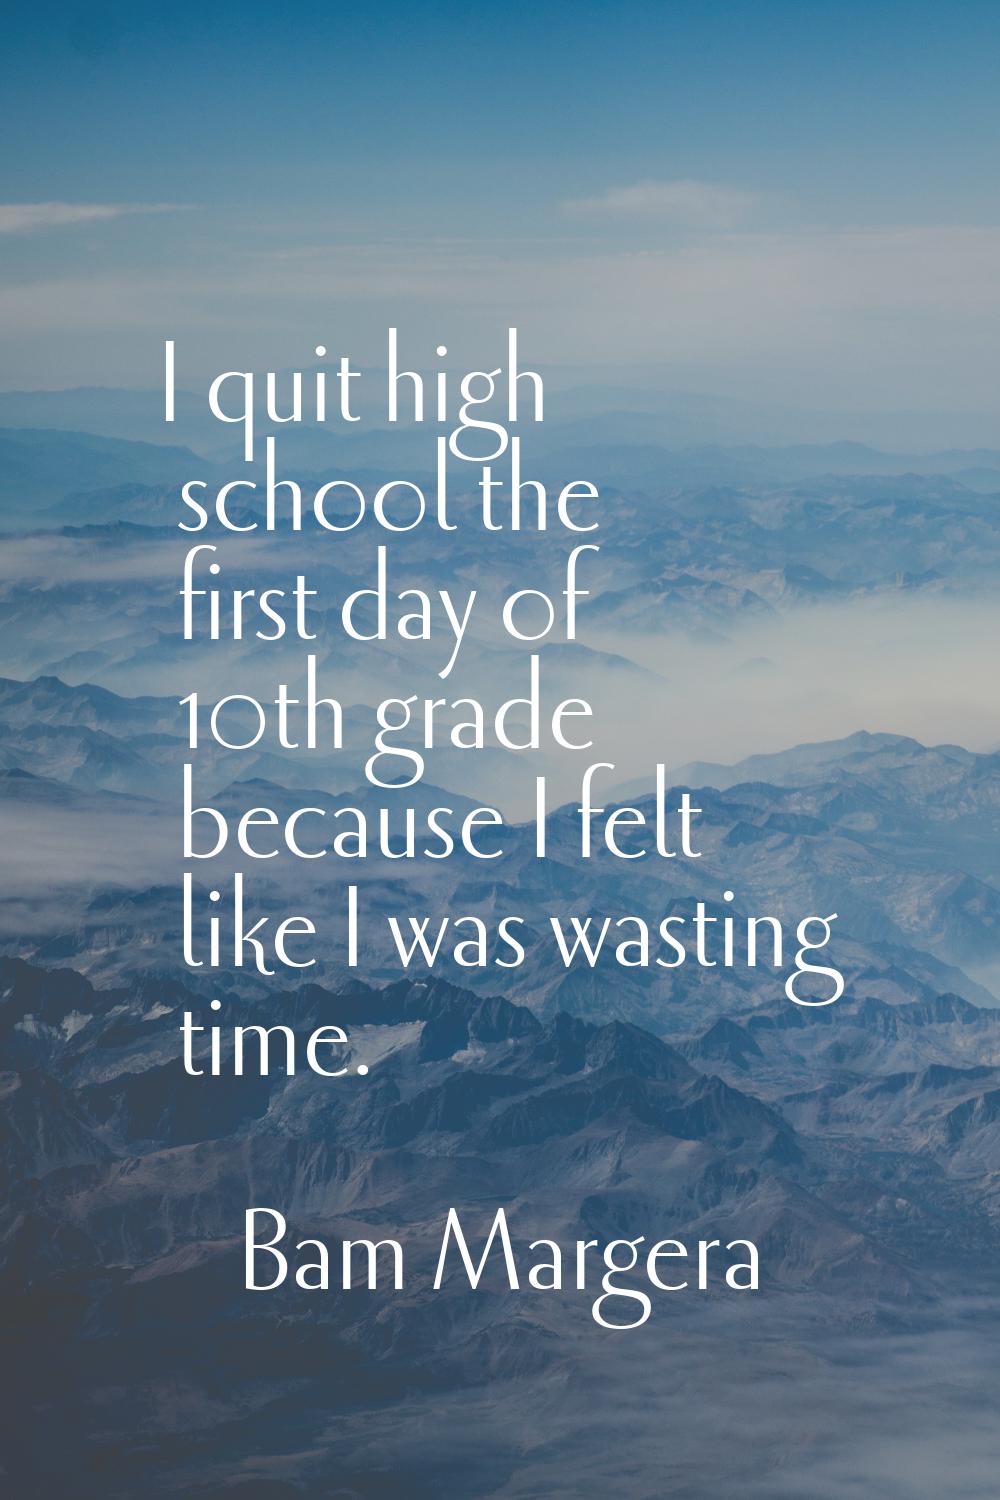 I quit high school the first day of 10th grade because I felt like I was wasting time.